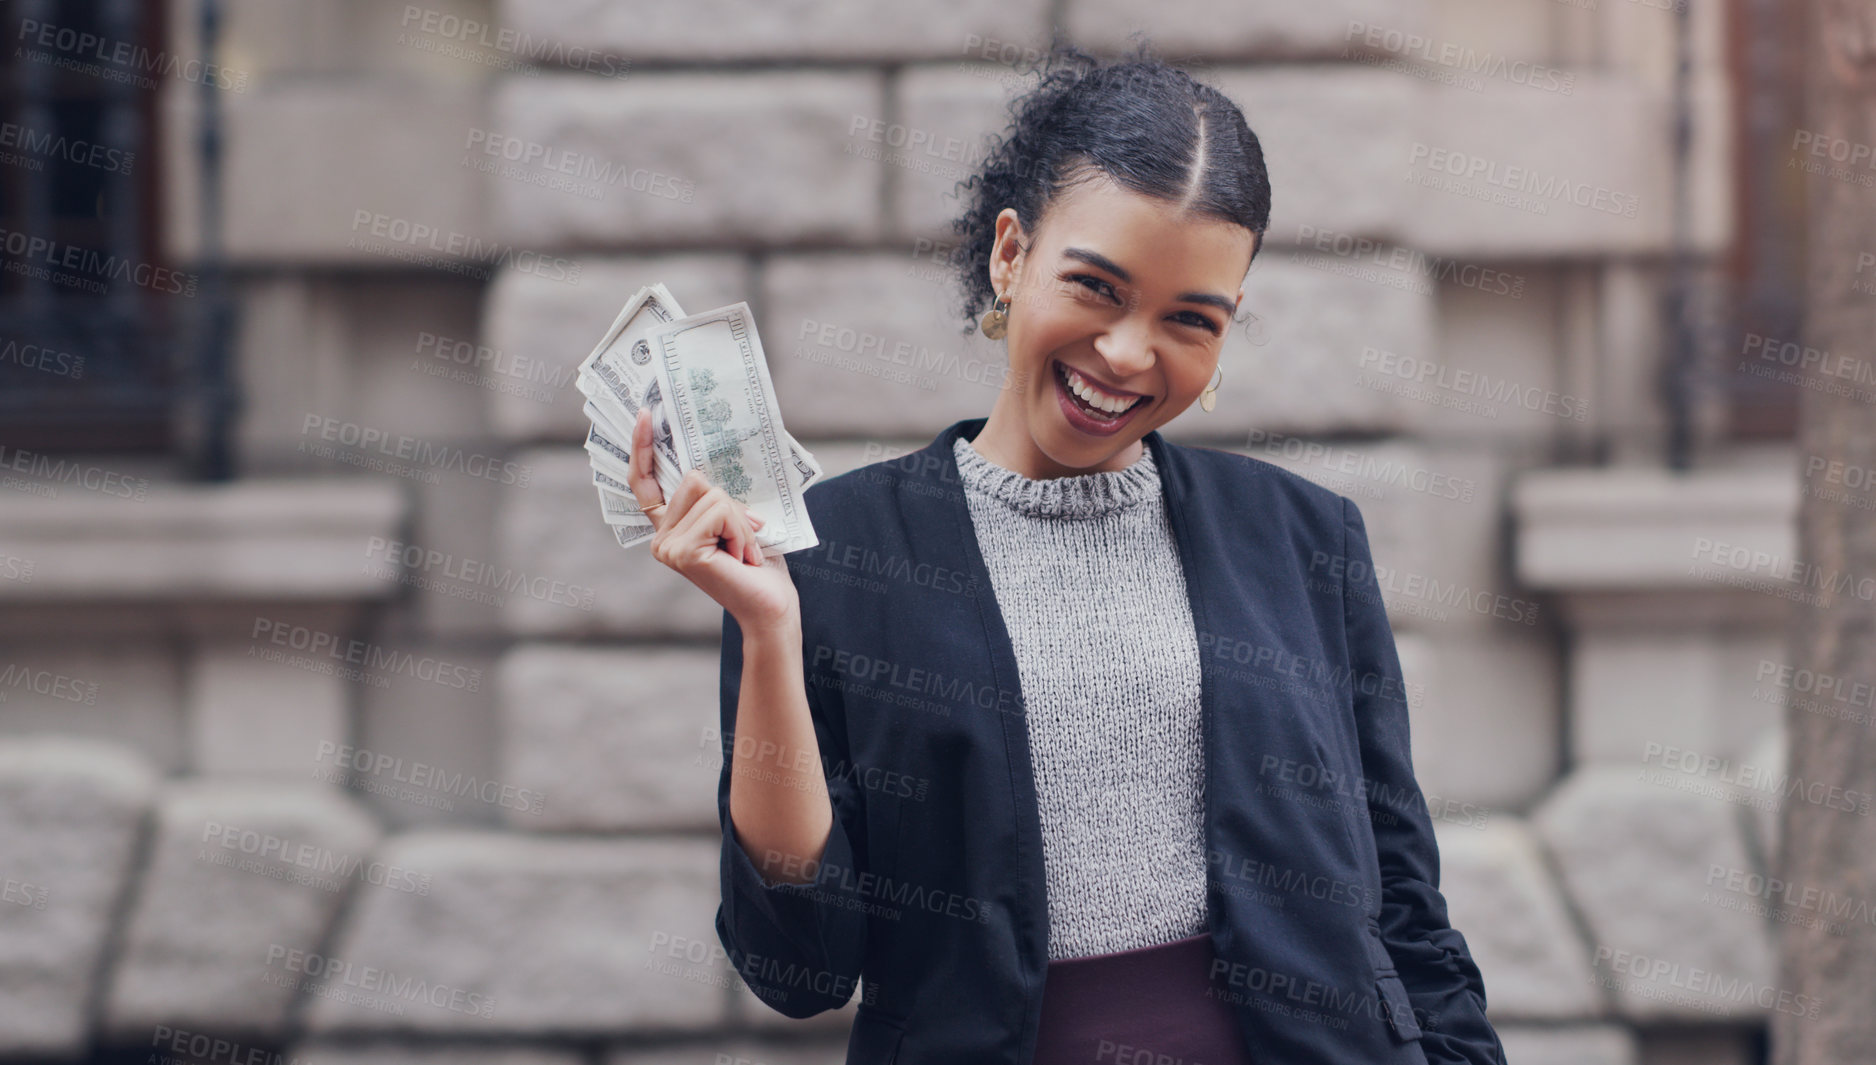 Buy stock photo Cropped portrait of an attractive young businesswoman smiling while holding a stack of money while standing outdoors in the city